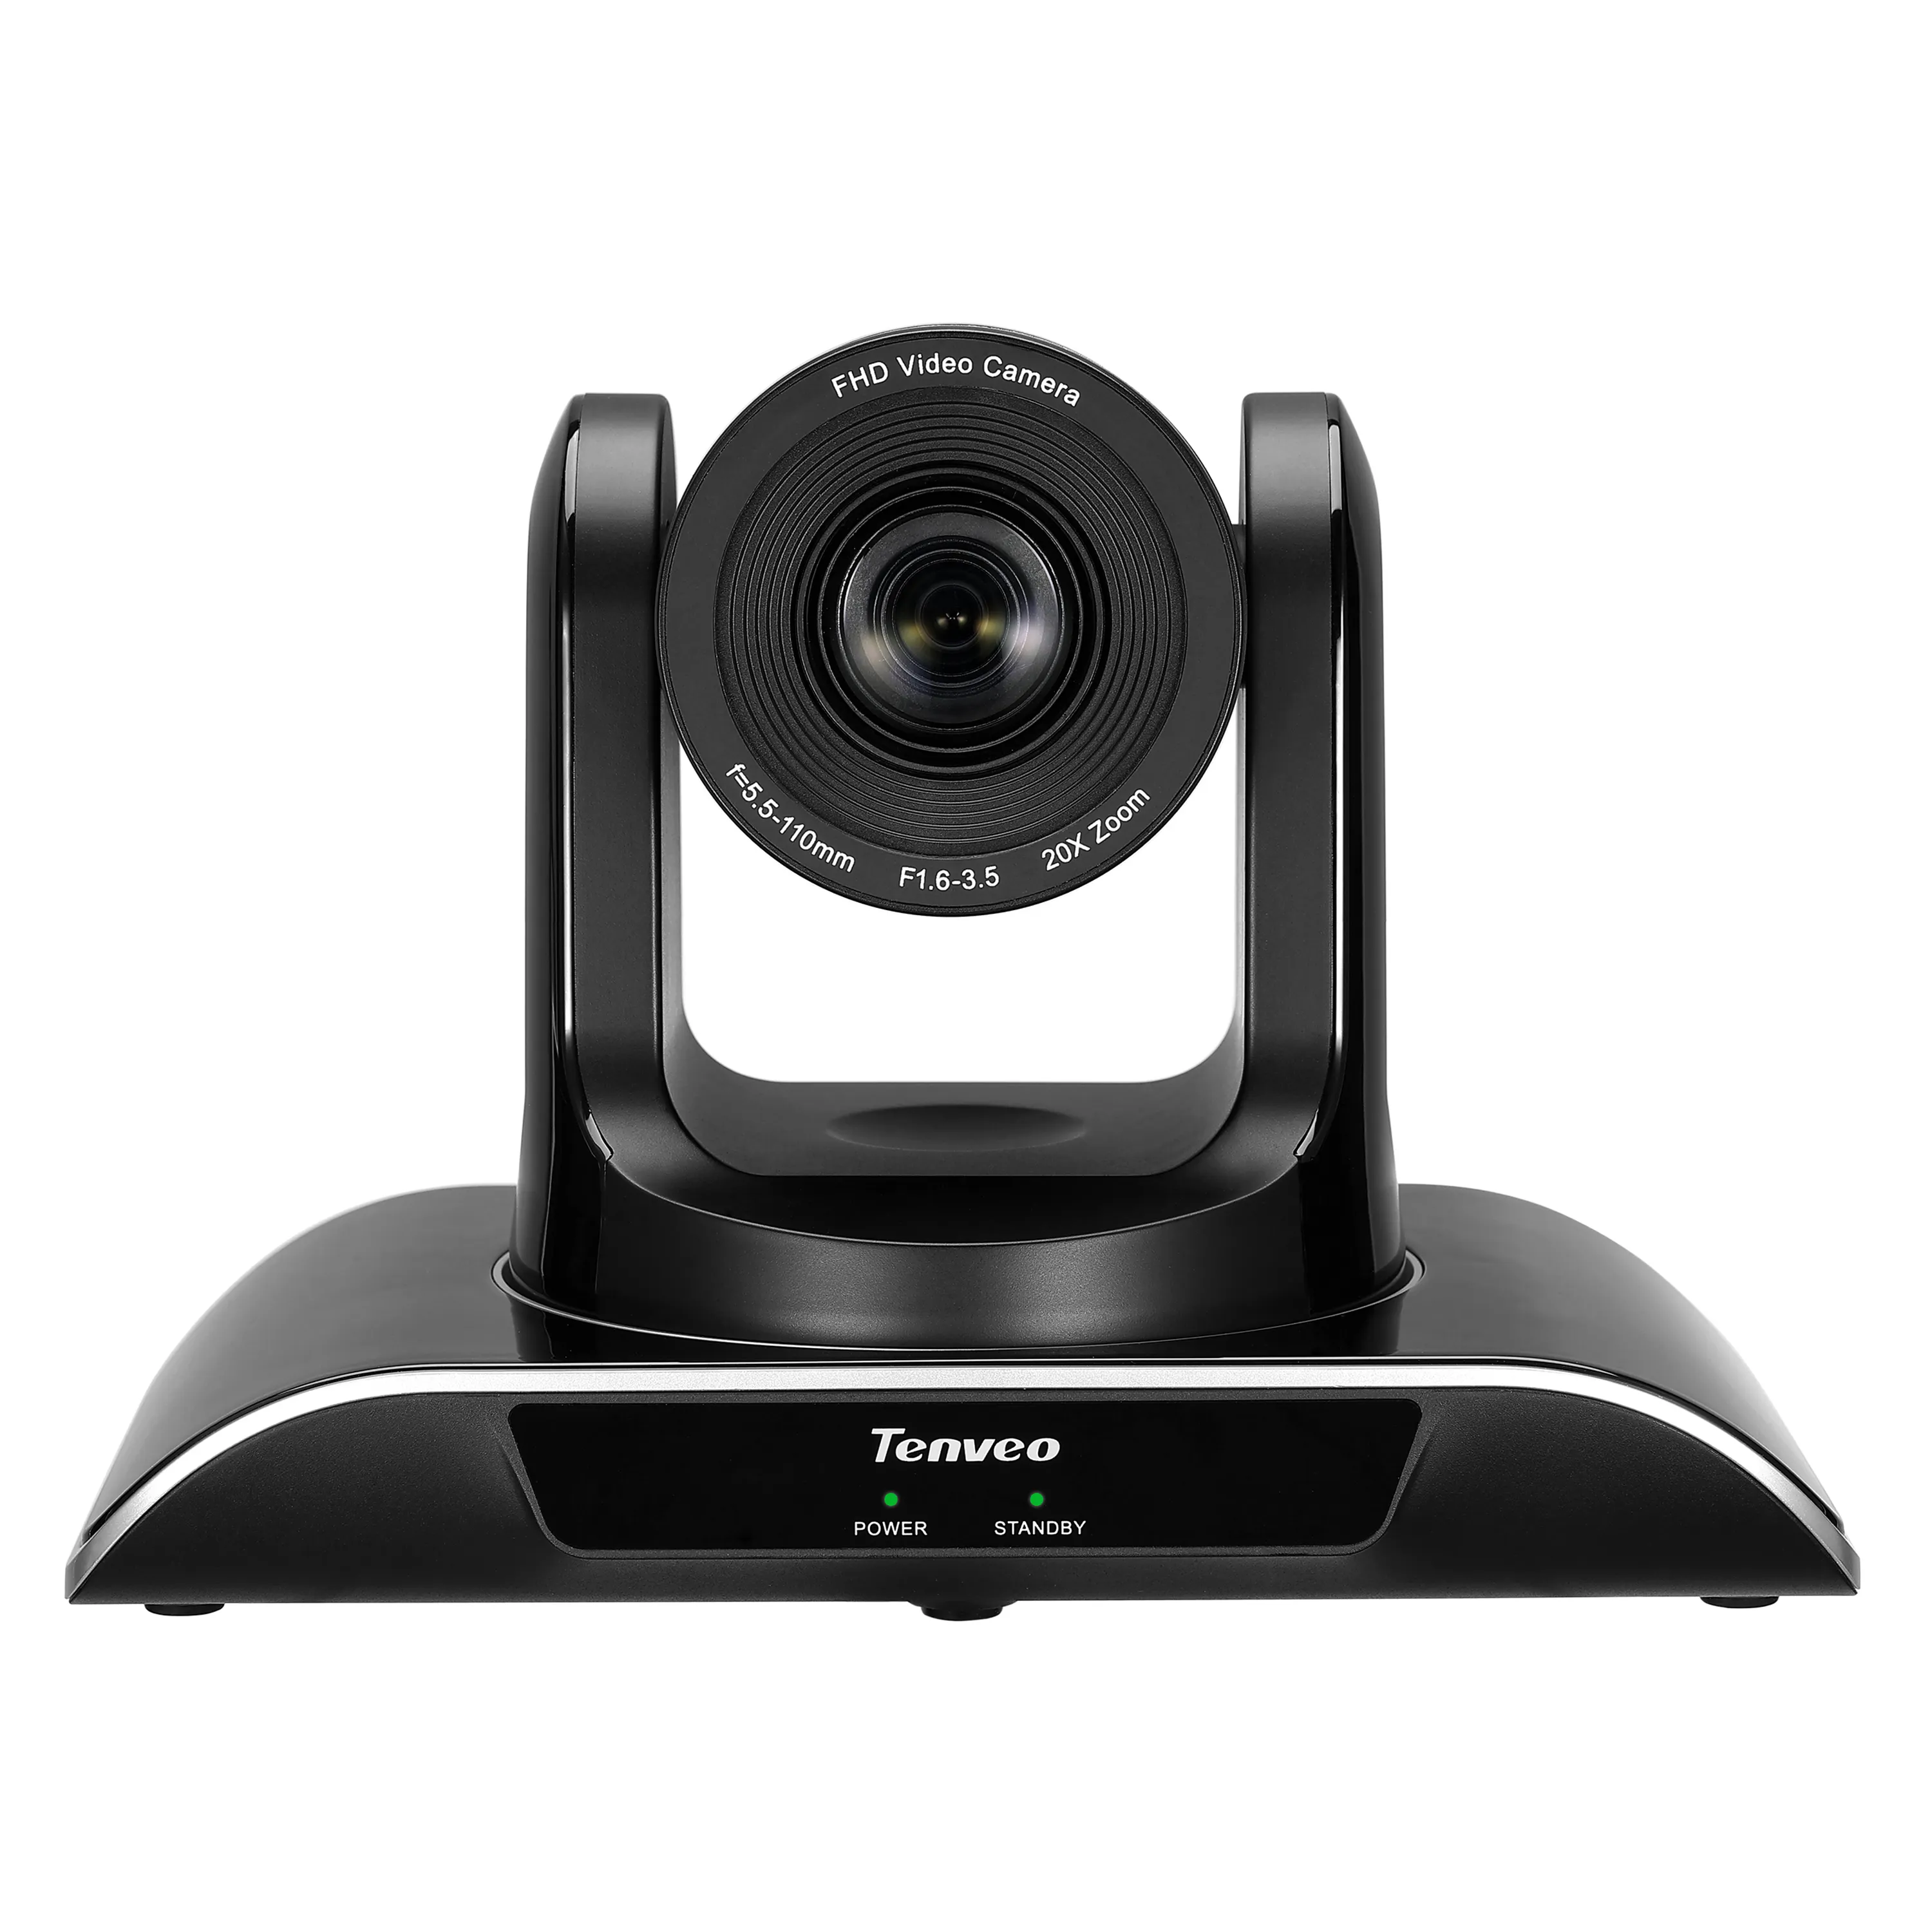 Hot-selling TEVO-VHD20N full hd 1920x1080 professional ptz video conference camera camcorder for skype